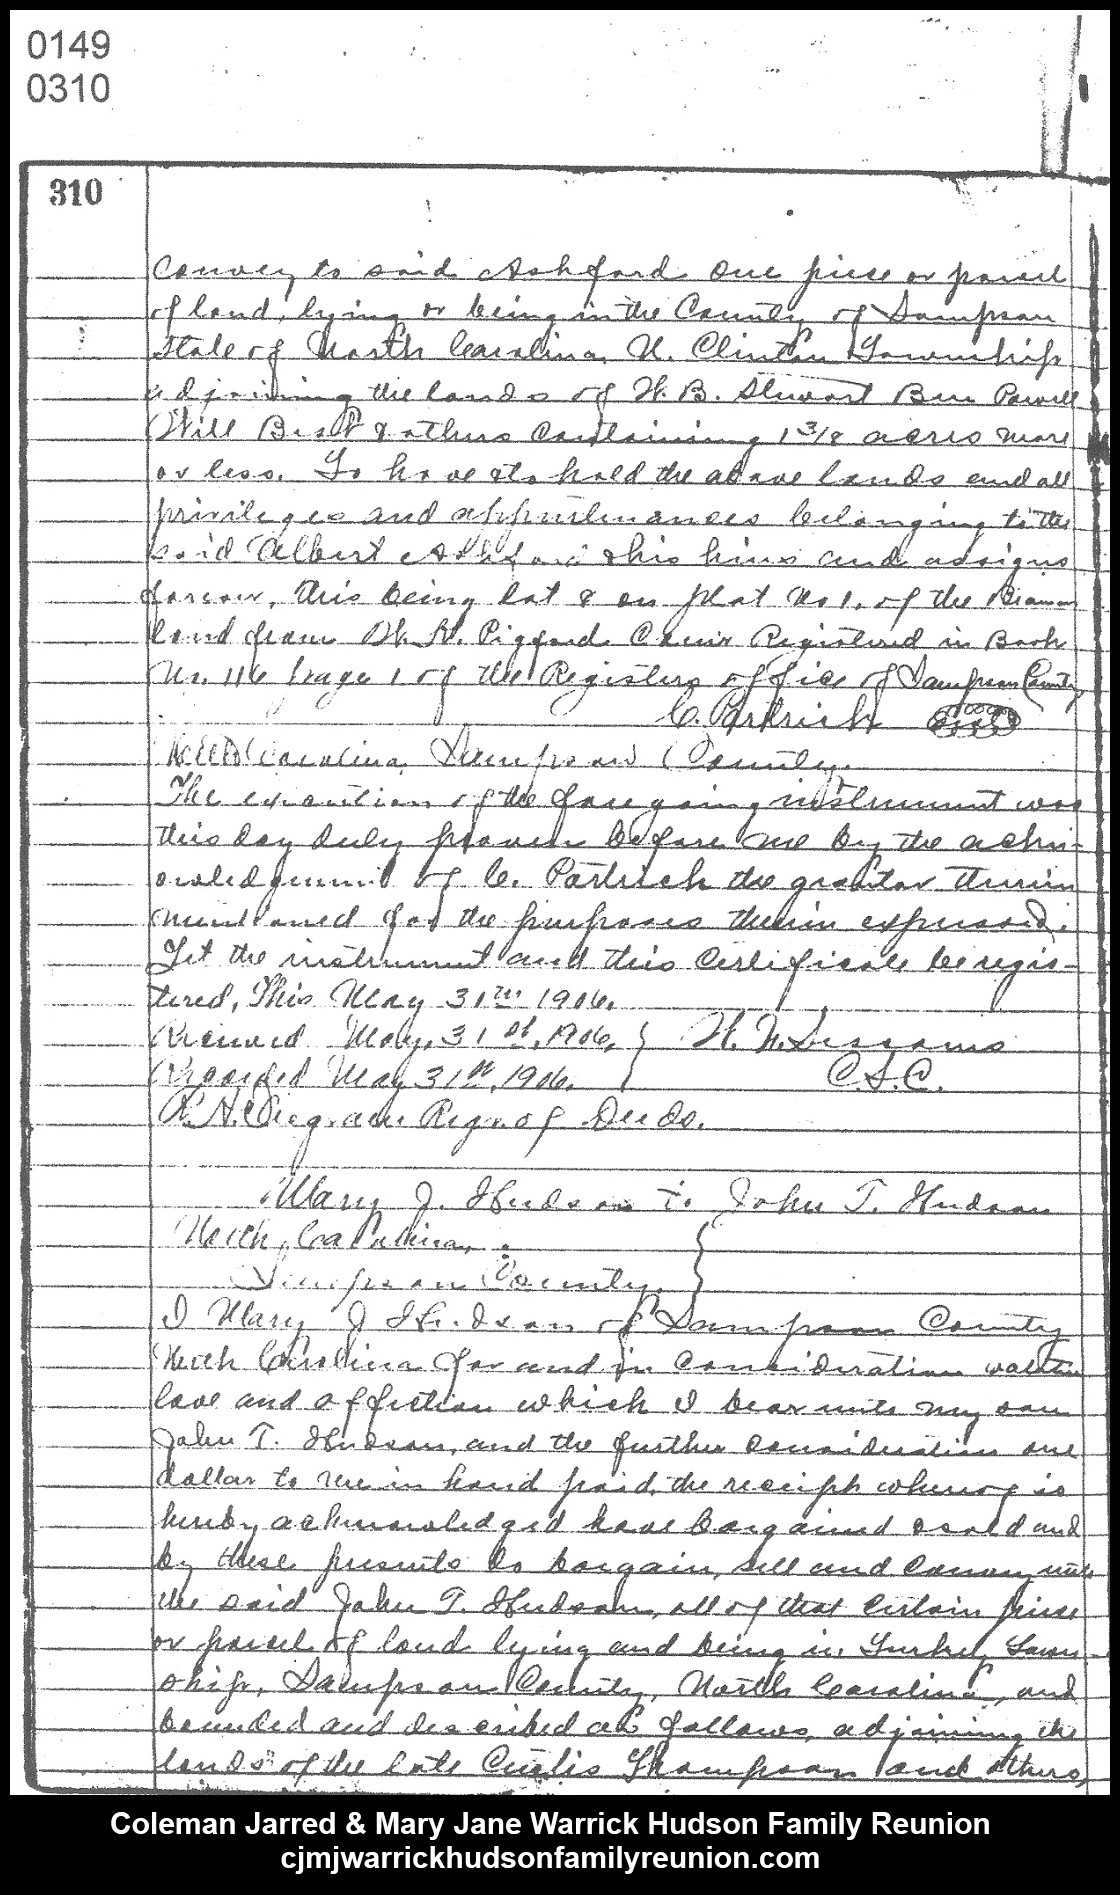 1906, 5-31a - Deed -MJ to John T. Hudson (page 1 of 2)